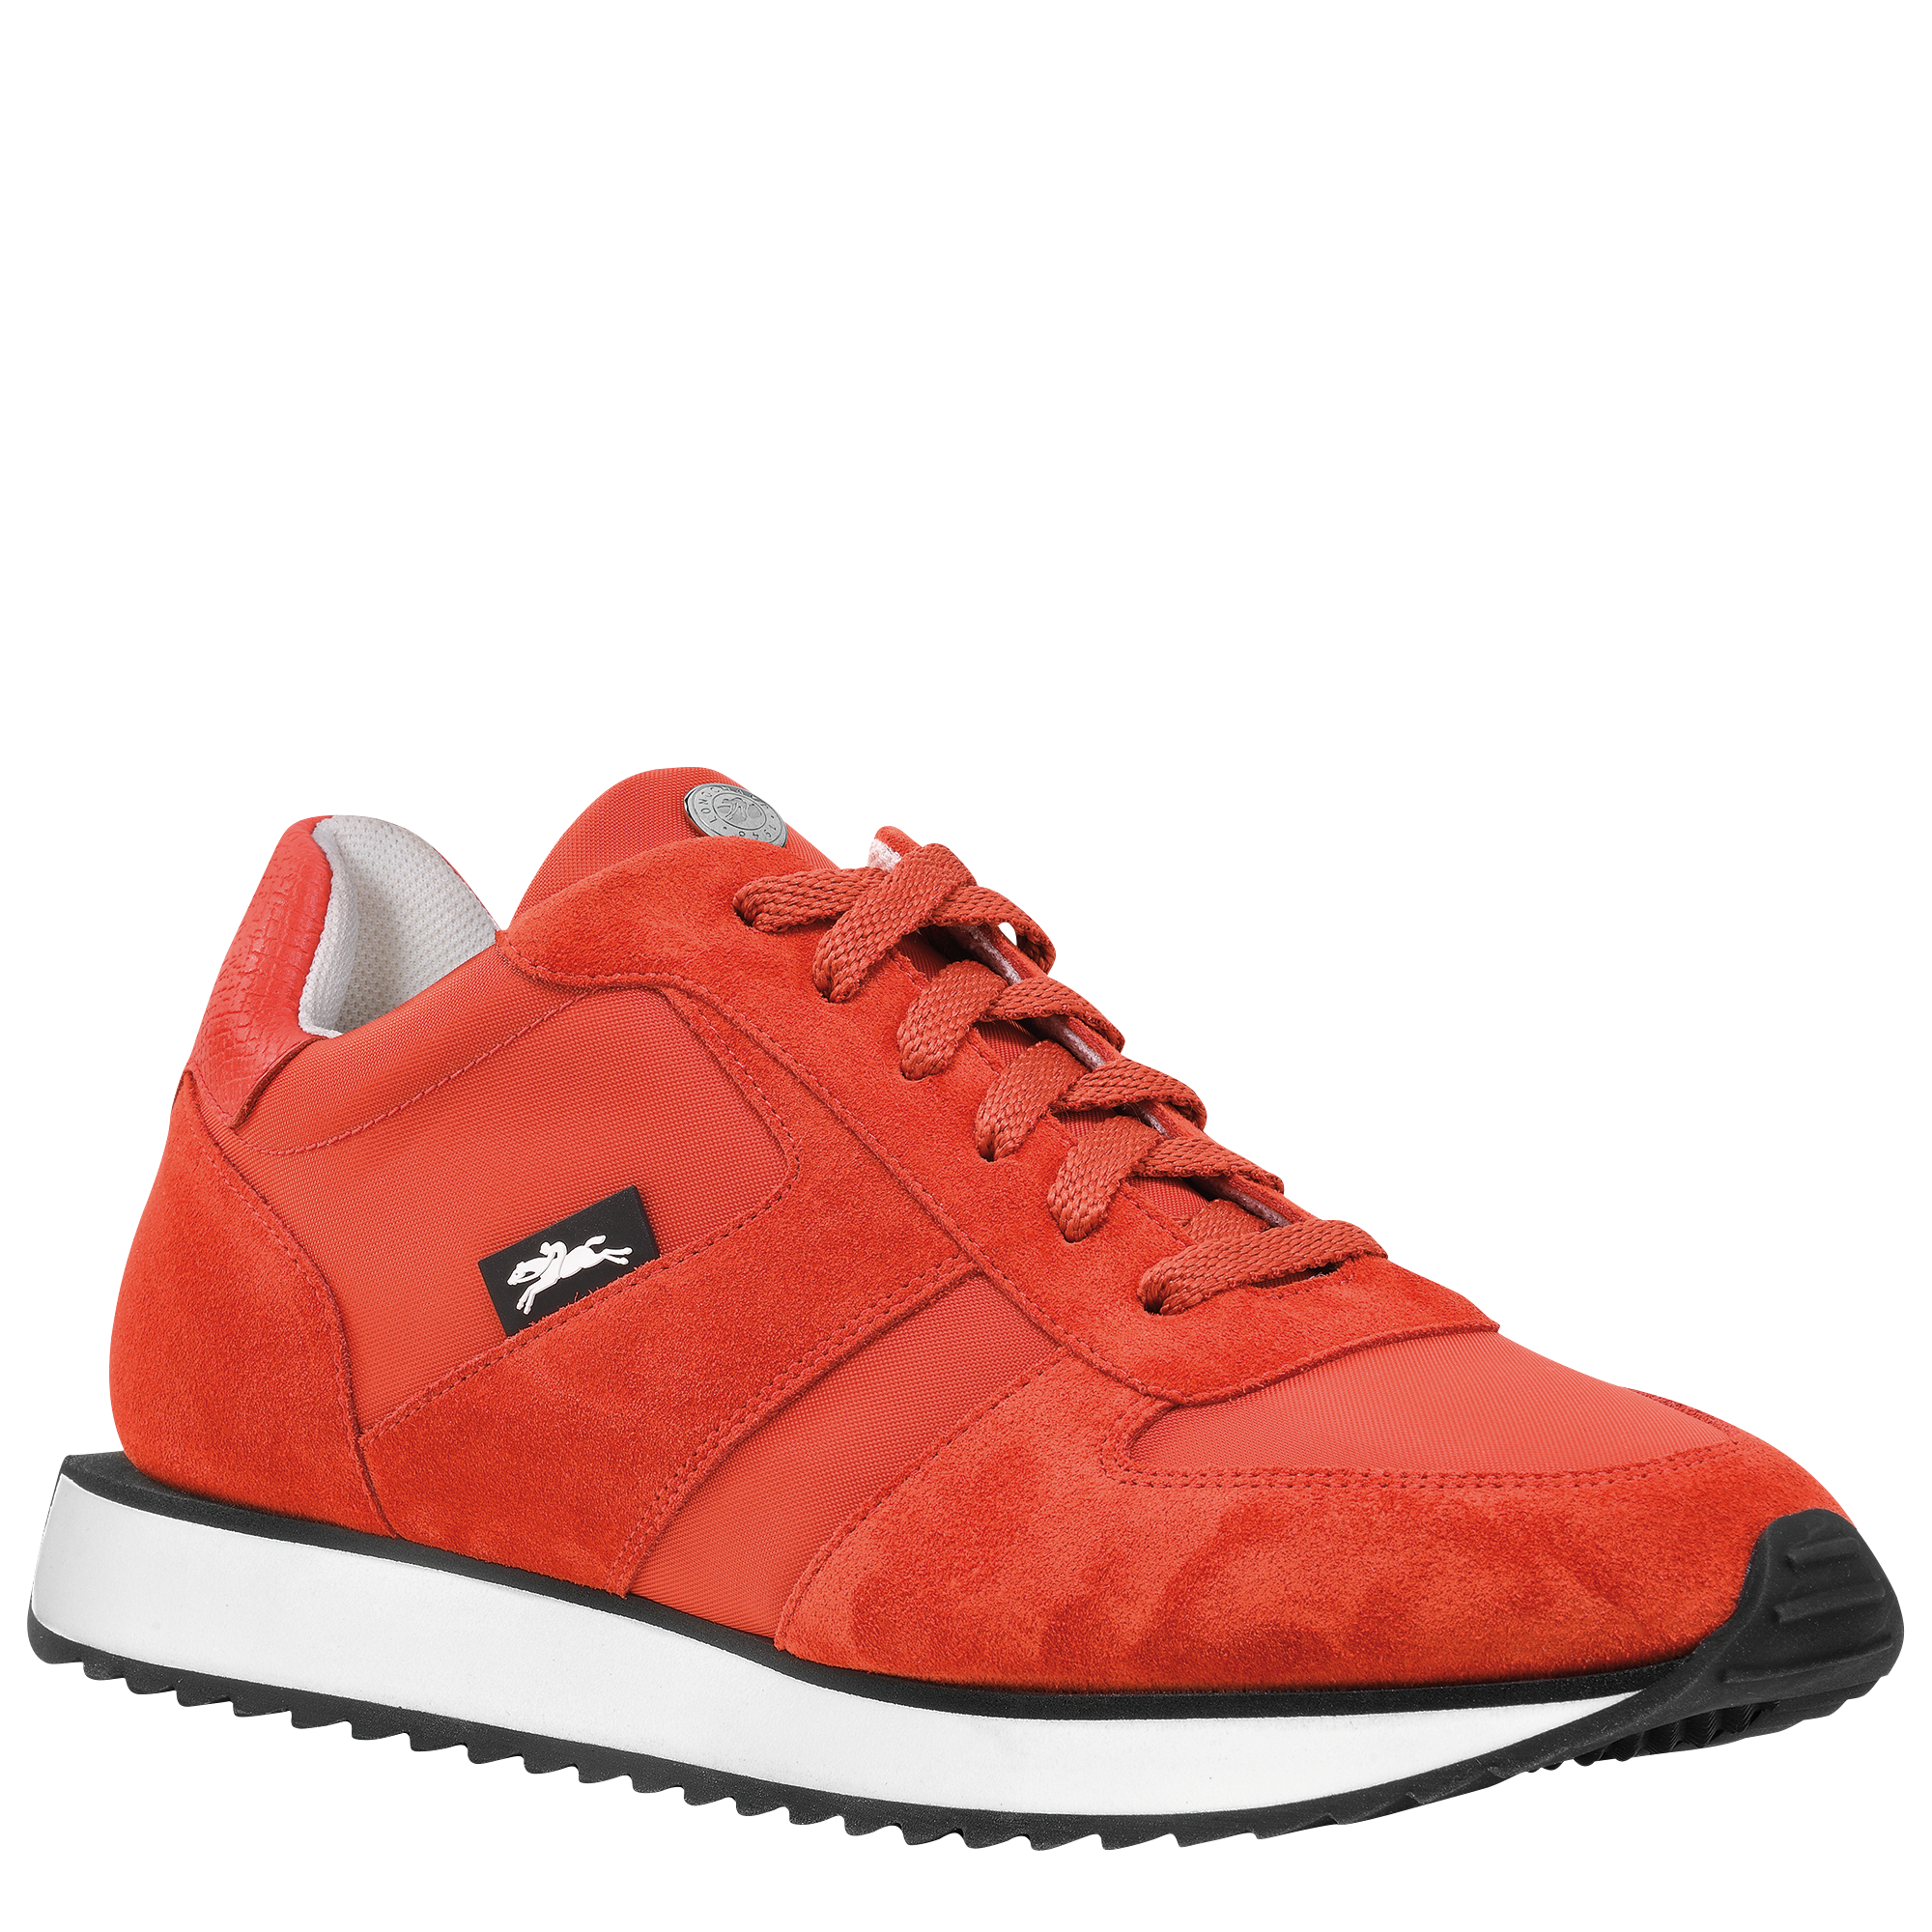 Le Pliage Green Sneakers, Tomate